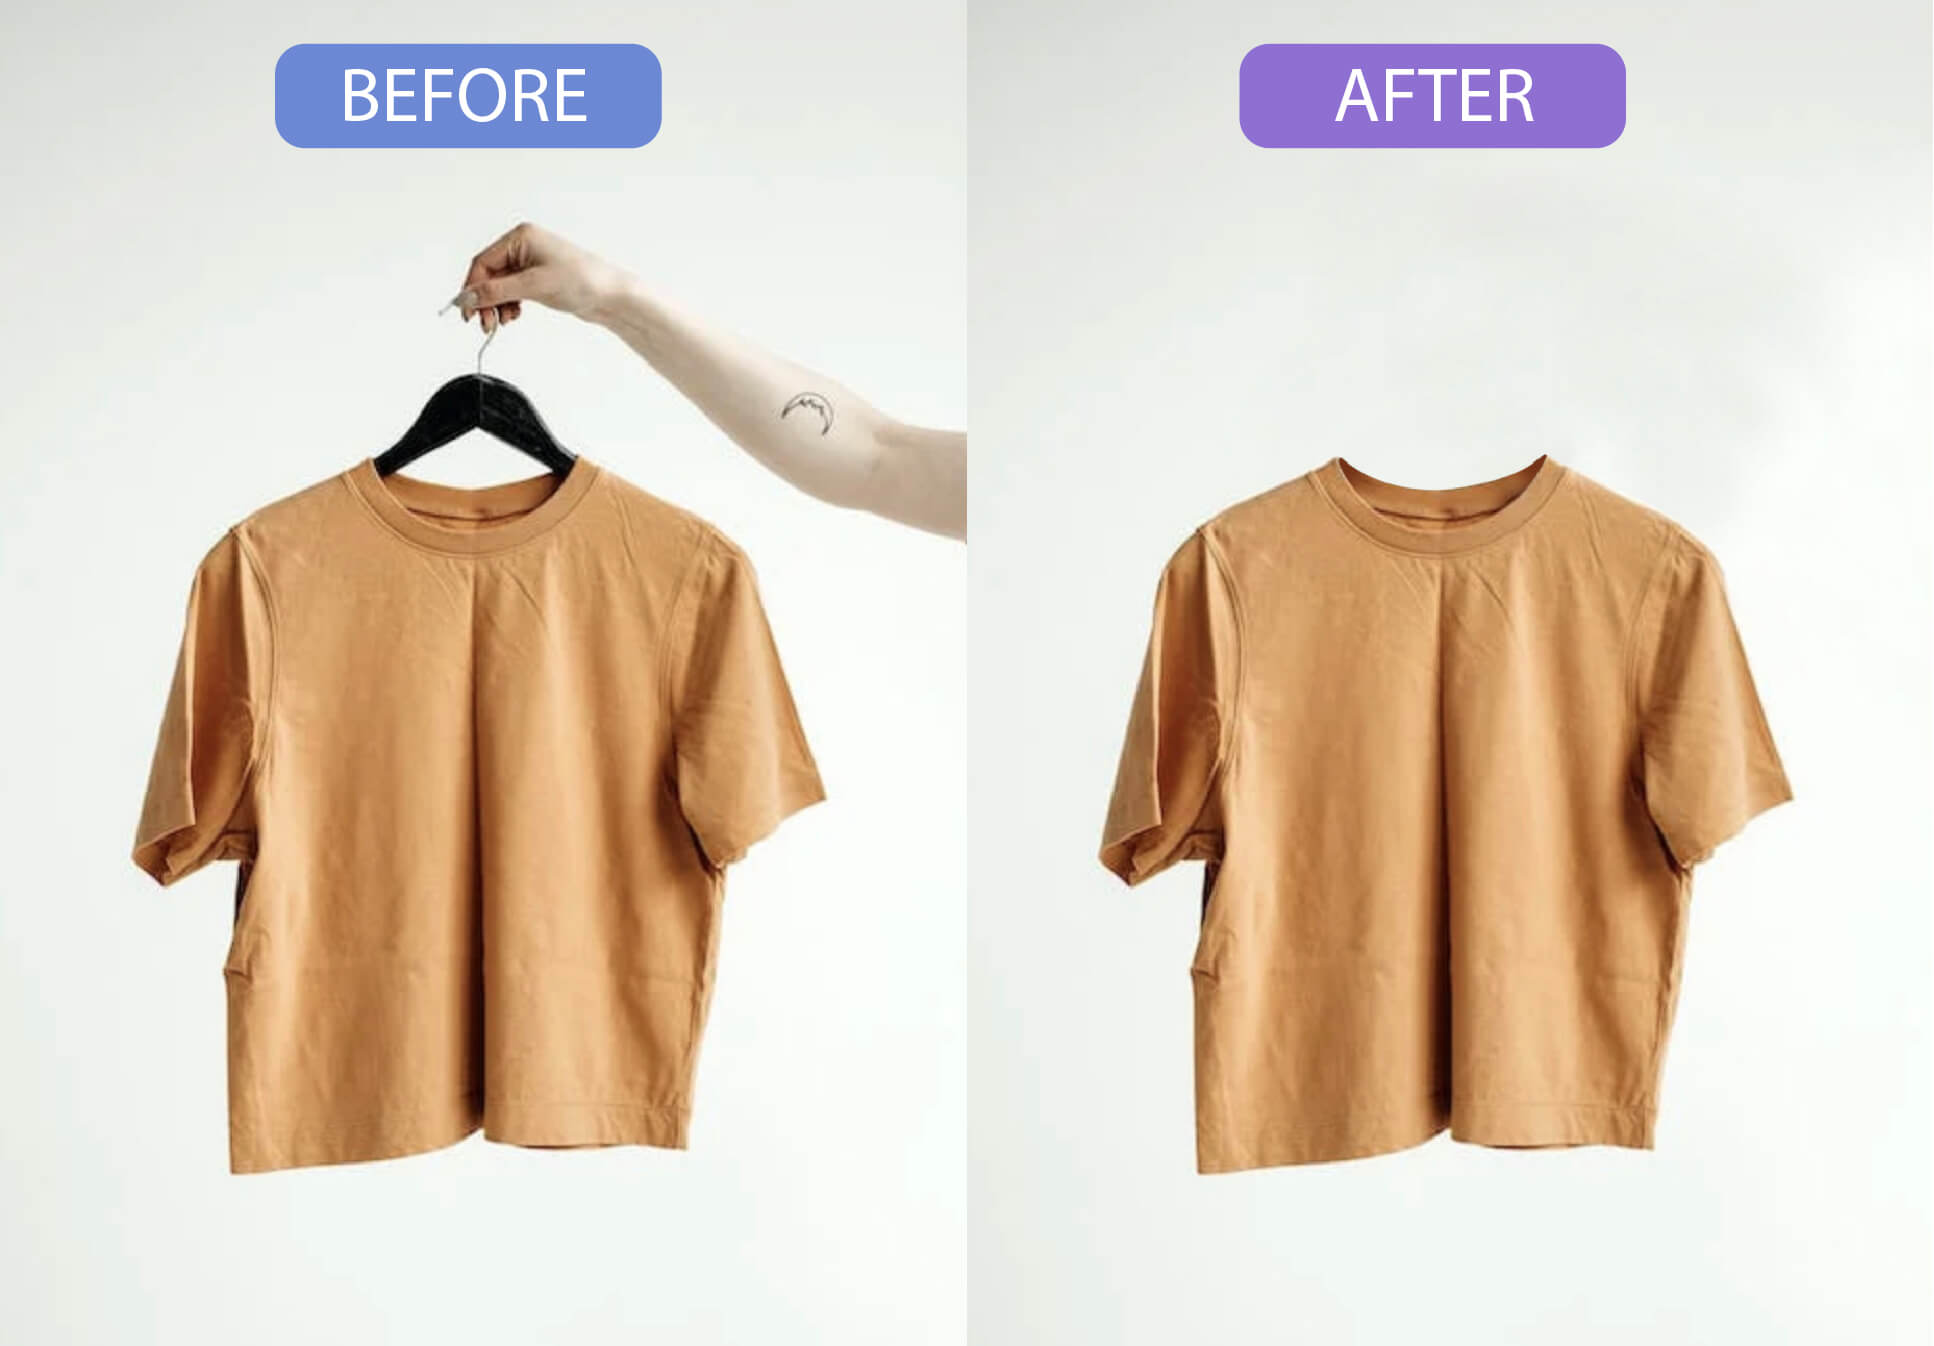 Remove the supporting objects from clothings using Photoshop